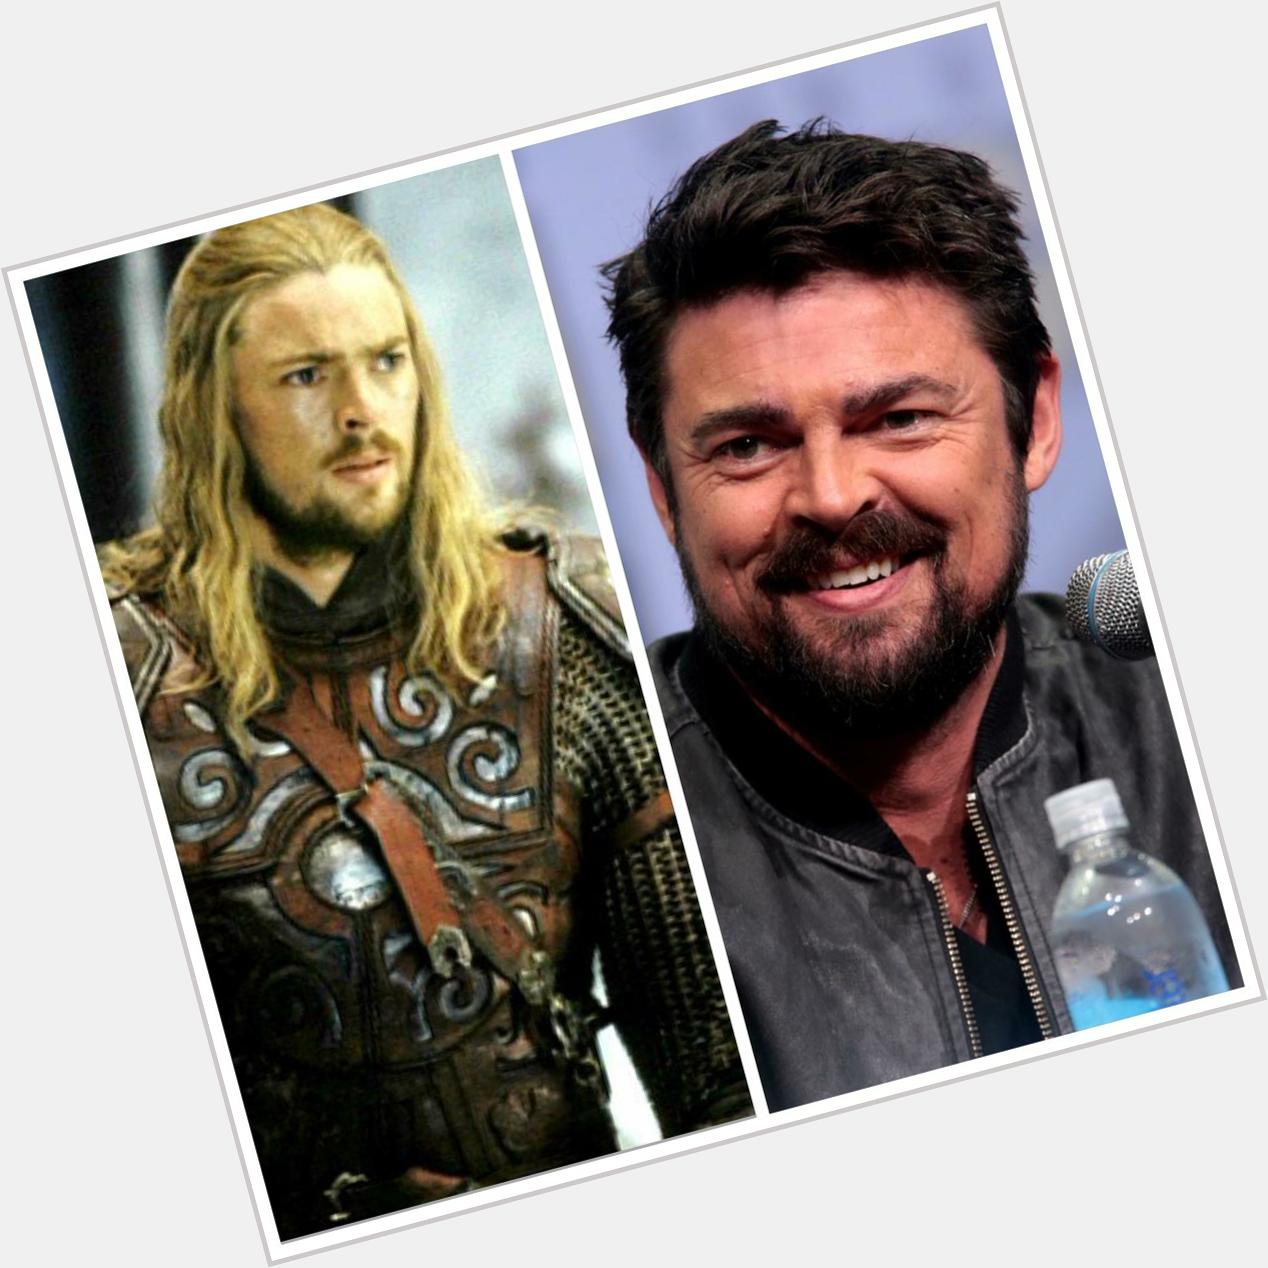 Happy Birthday to the Horse Master as Karl Urban turns 48 today! 